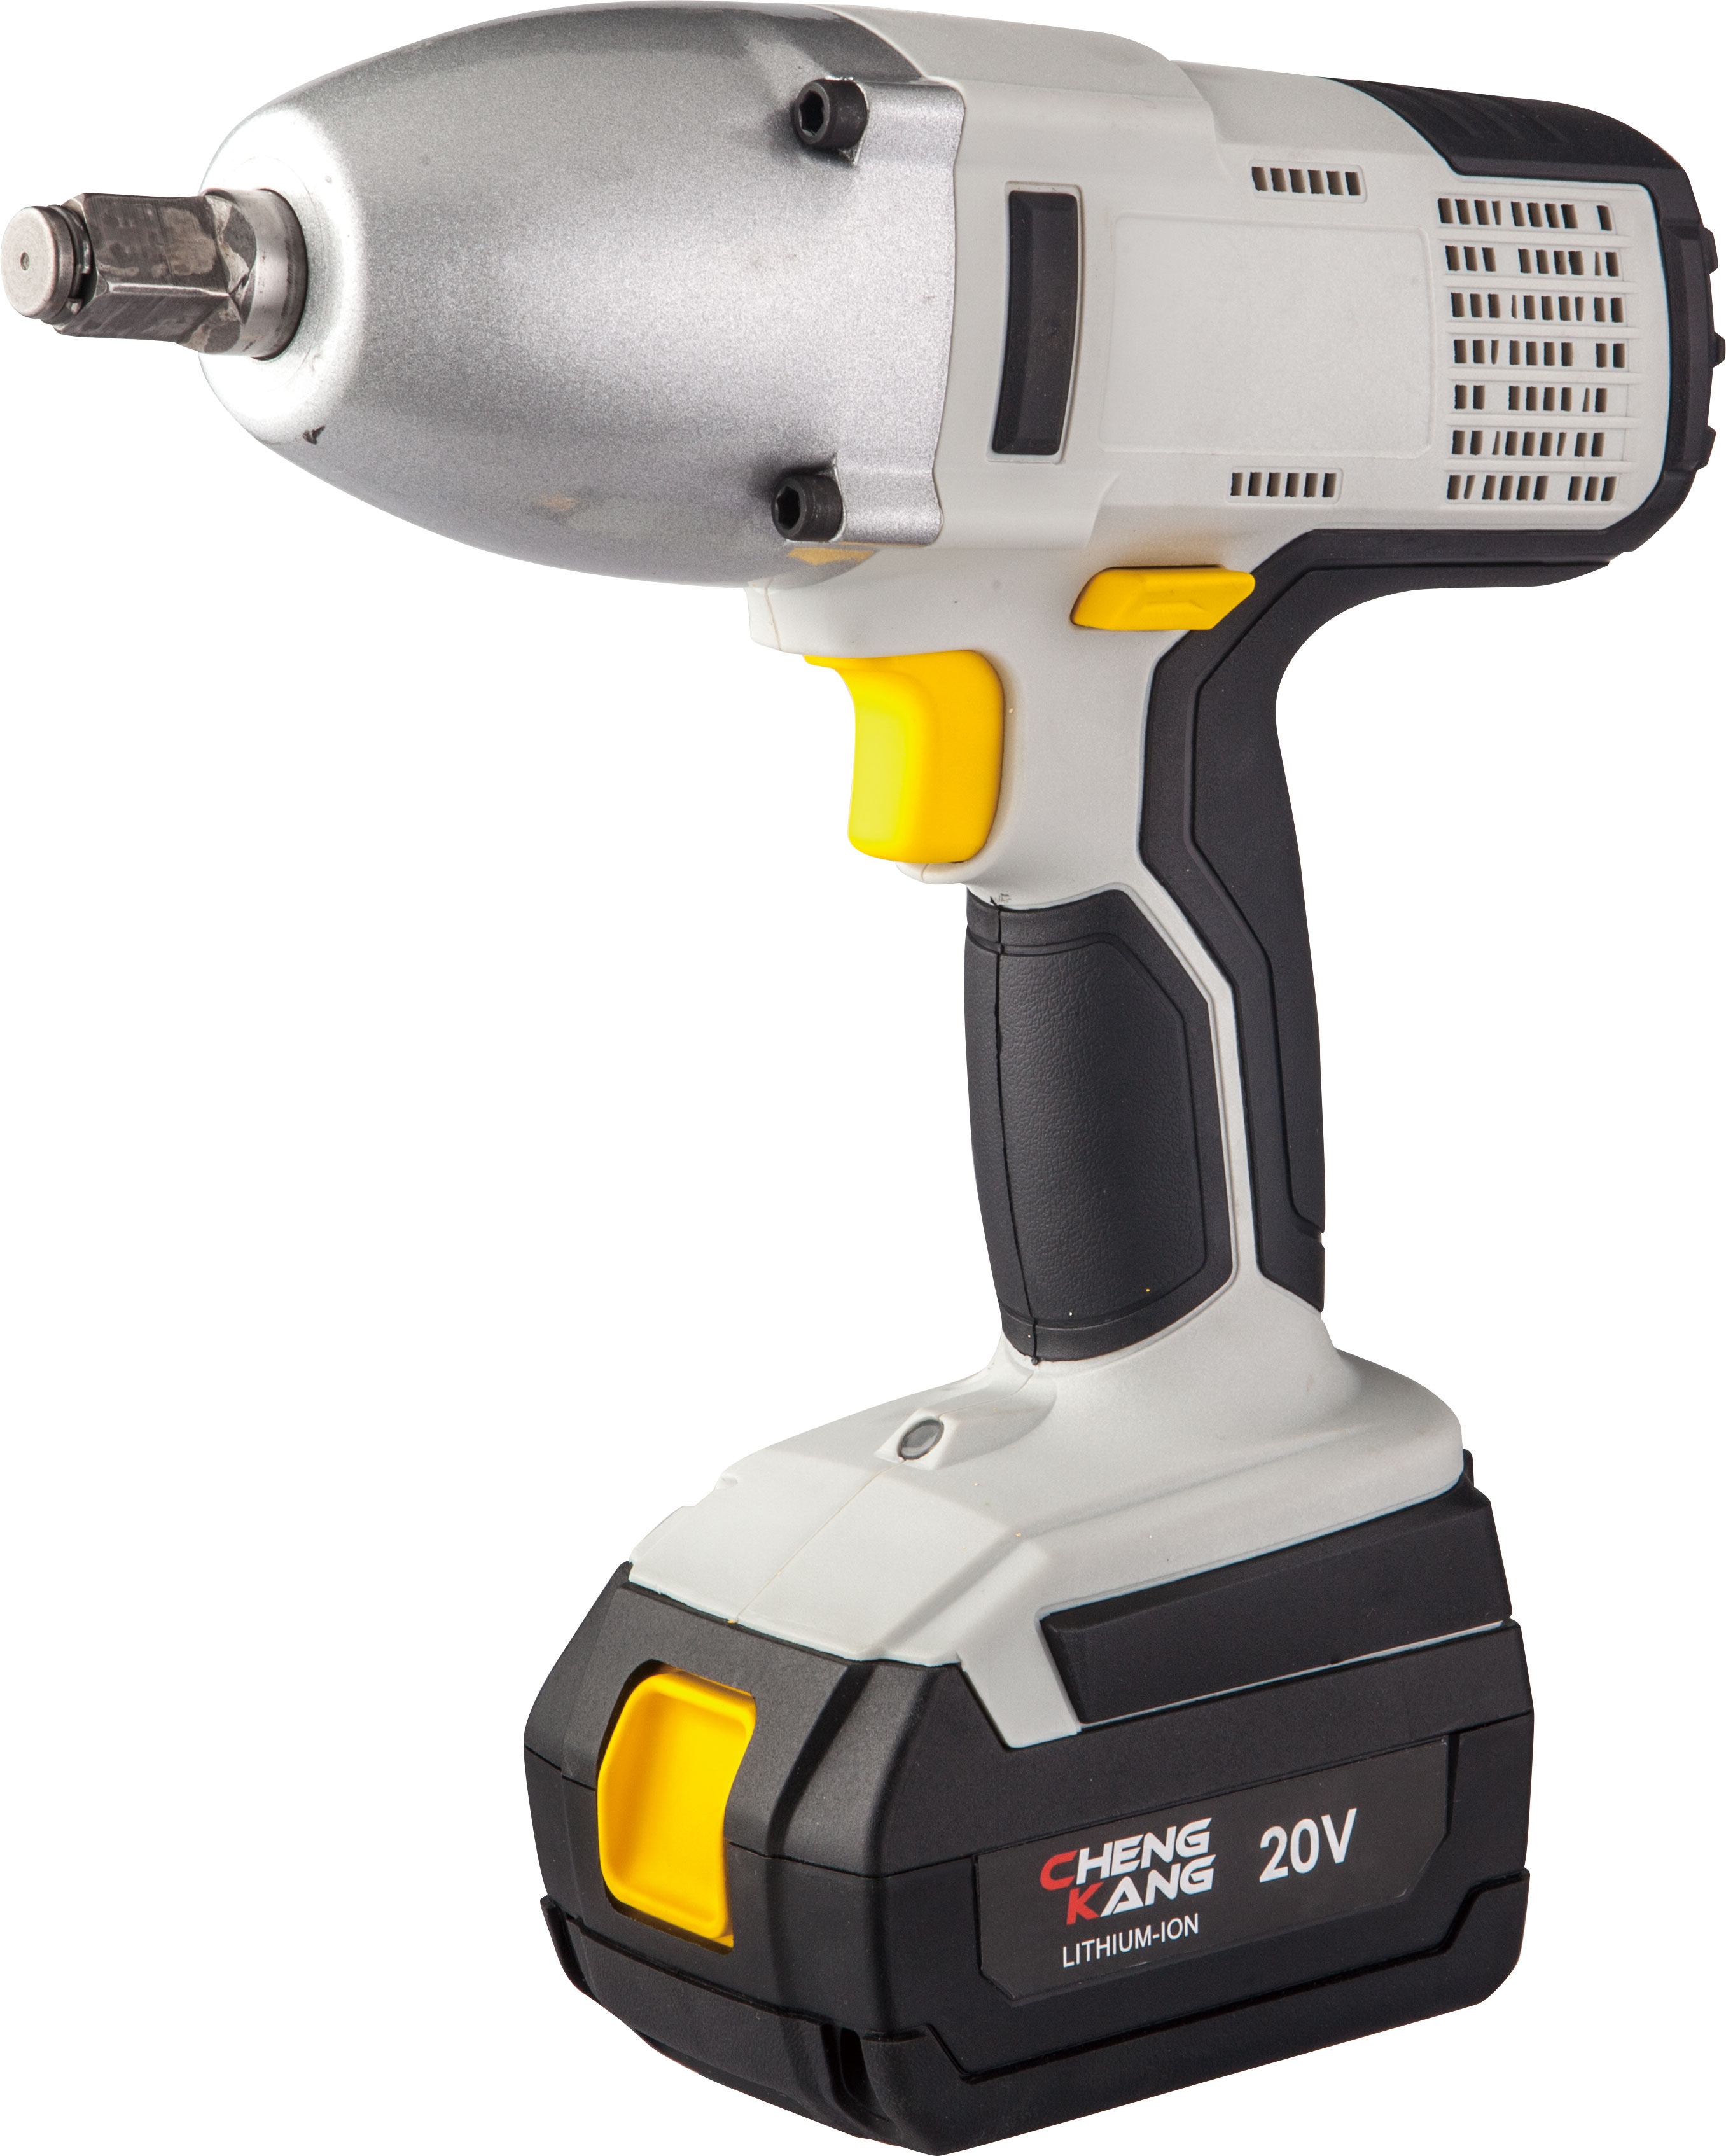 20V 450NM Impact Wrench